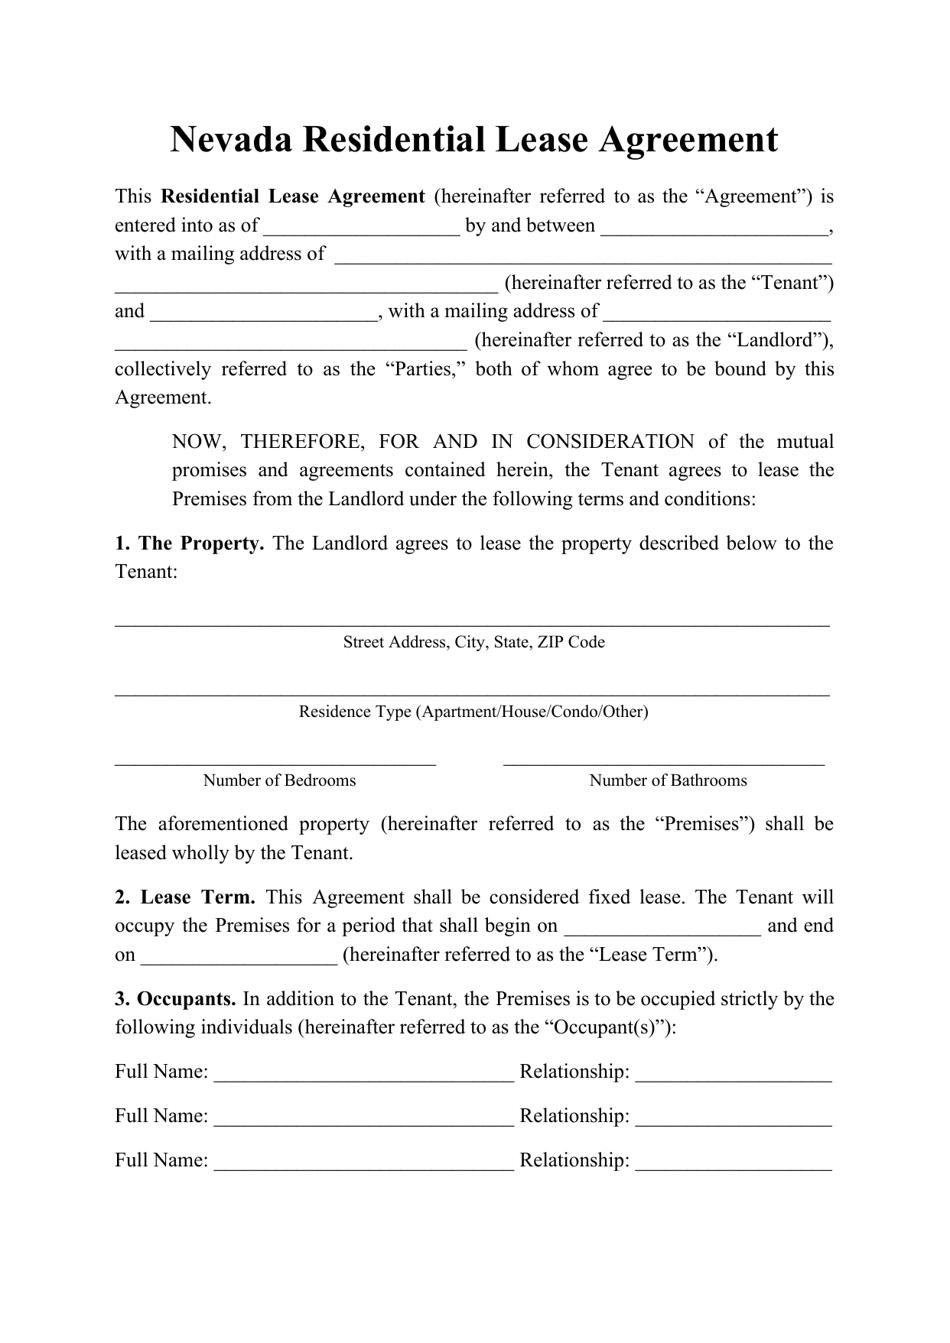 Residential Lease Agreement Template - Nevada, Page 1